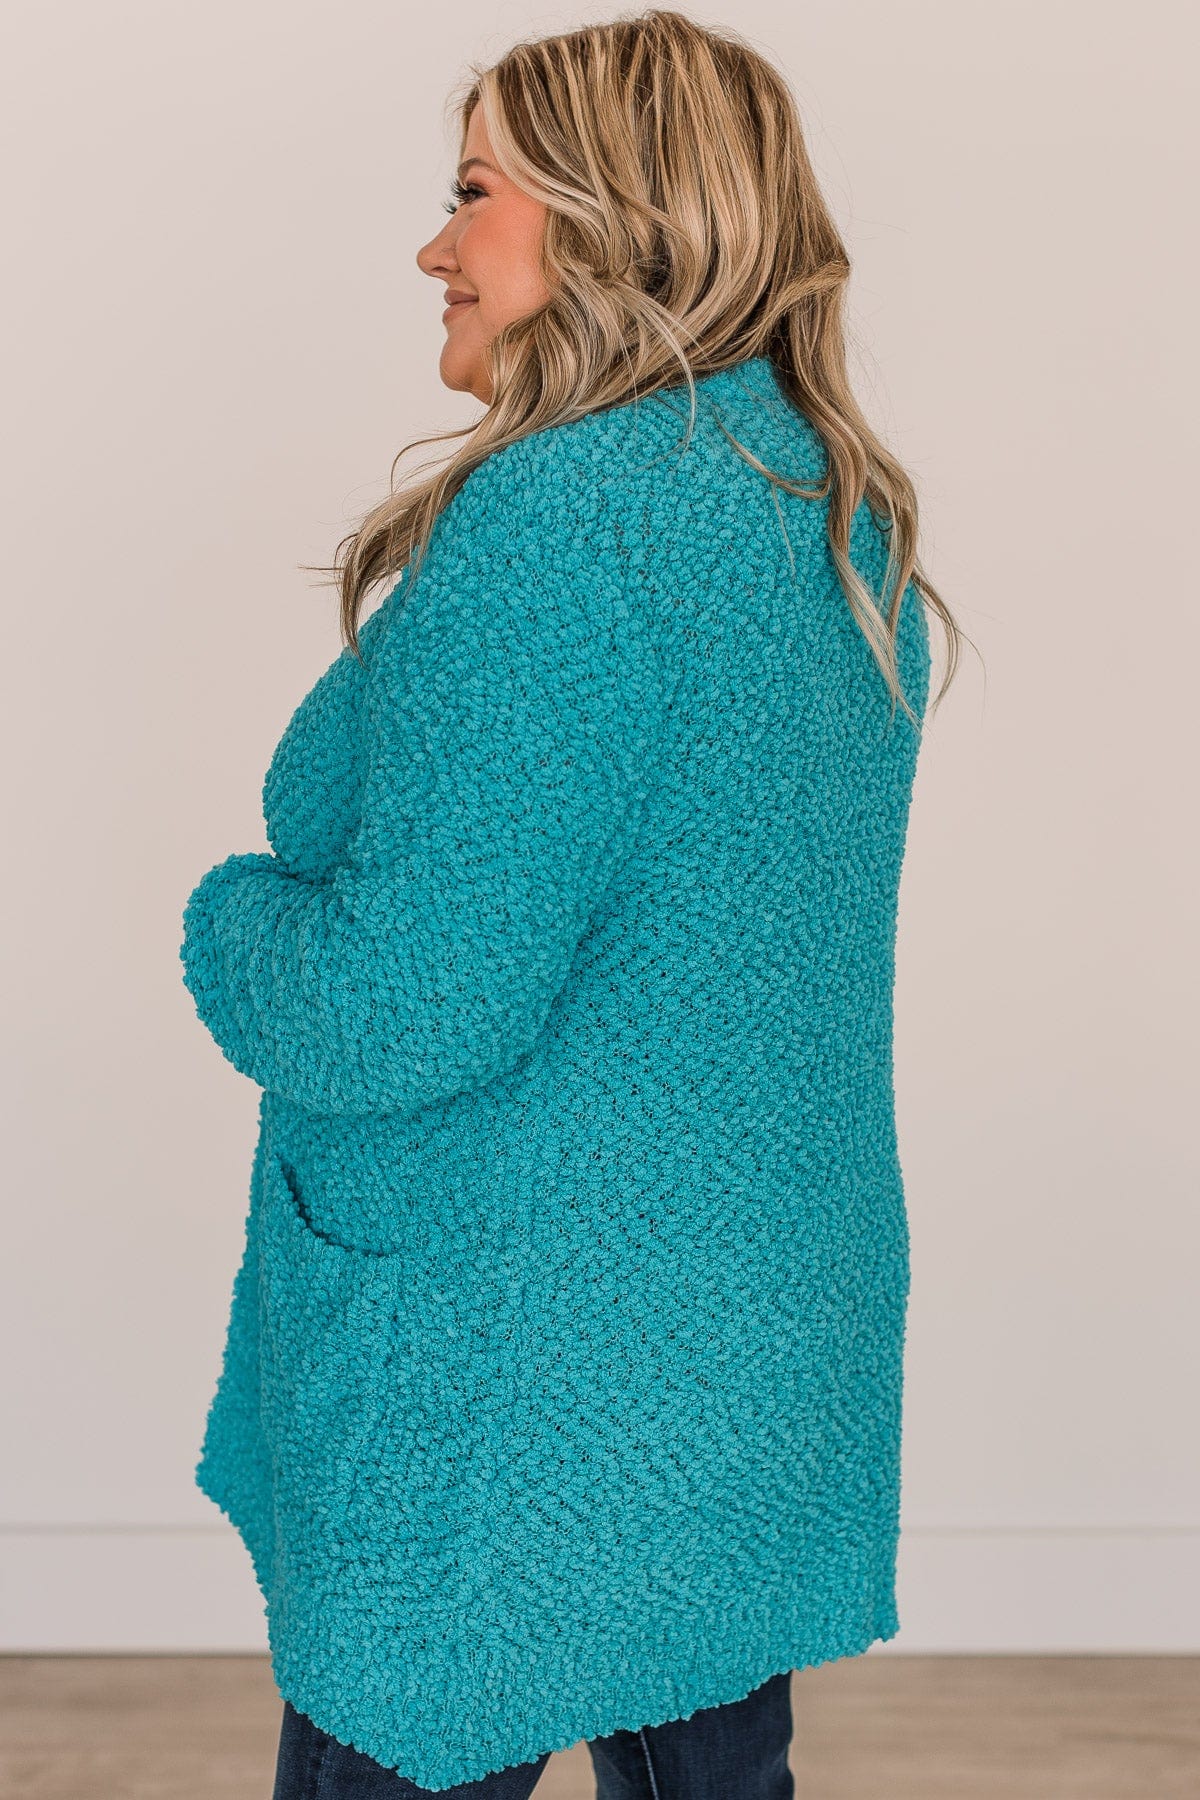 Take Another Look Popcorn Cardigan- Bright Blue